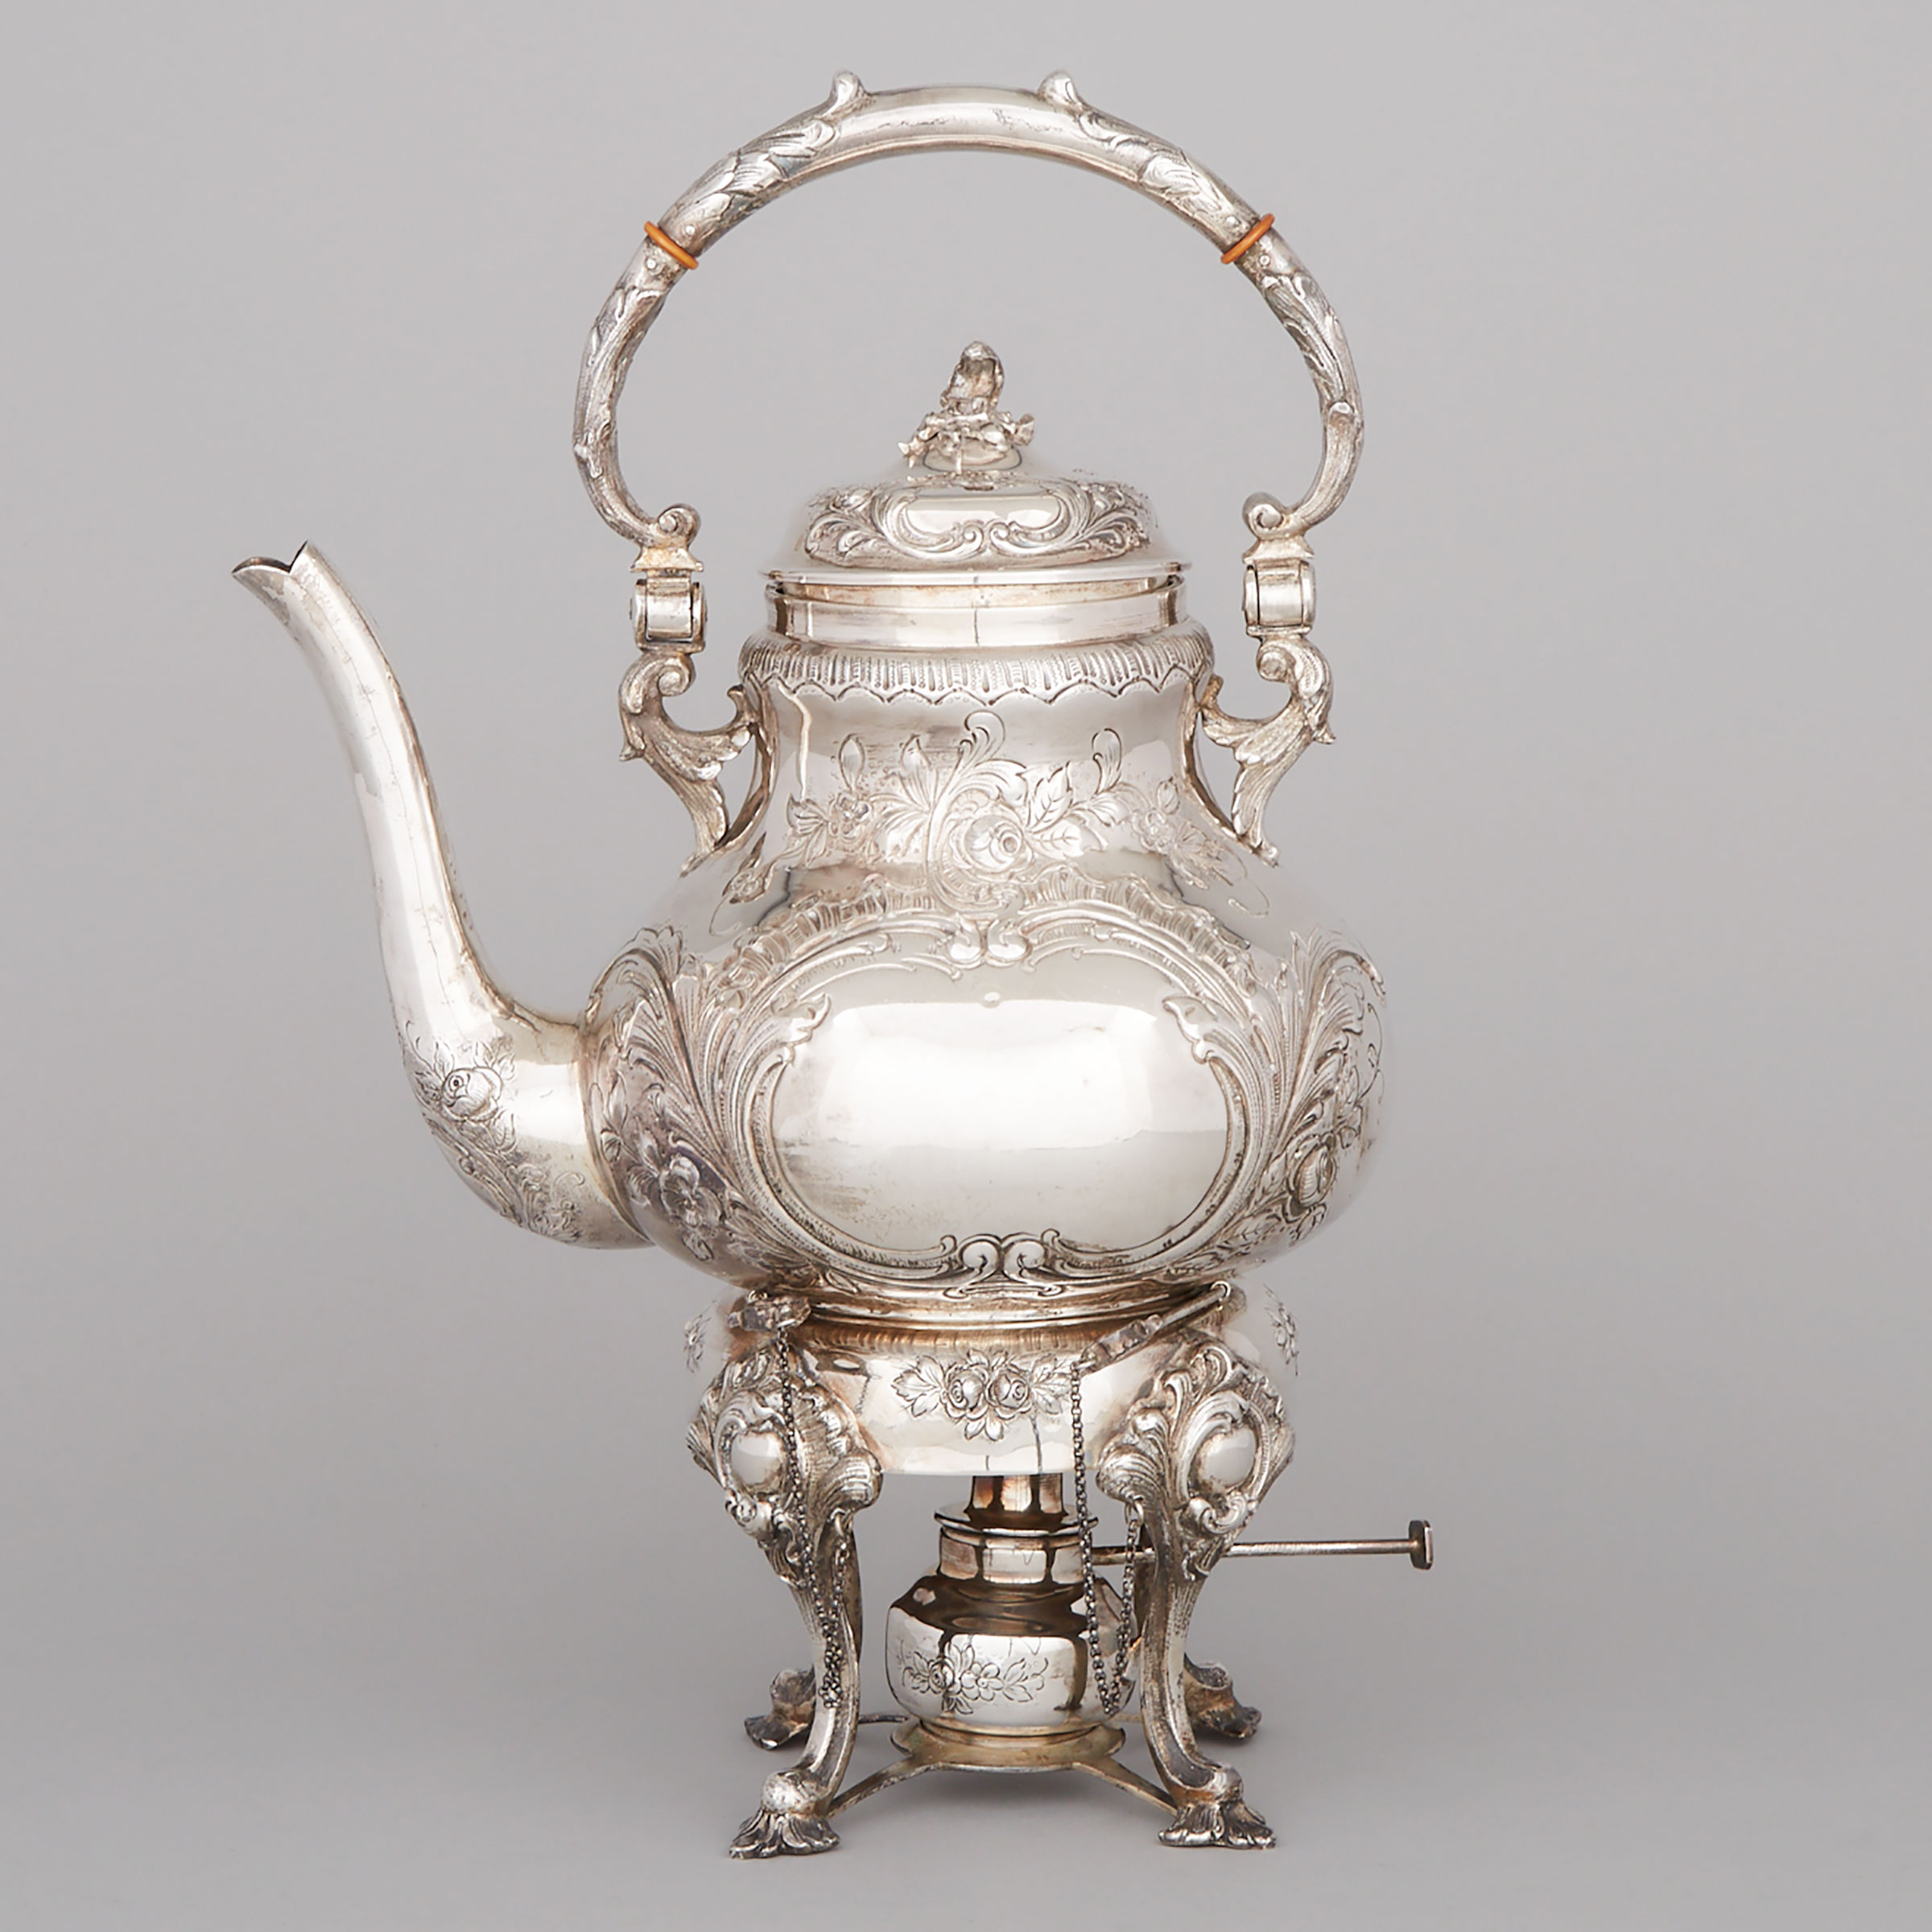 South American Silver Tea Kettle on Lampstand, 20th century